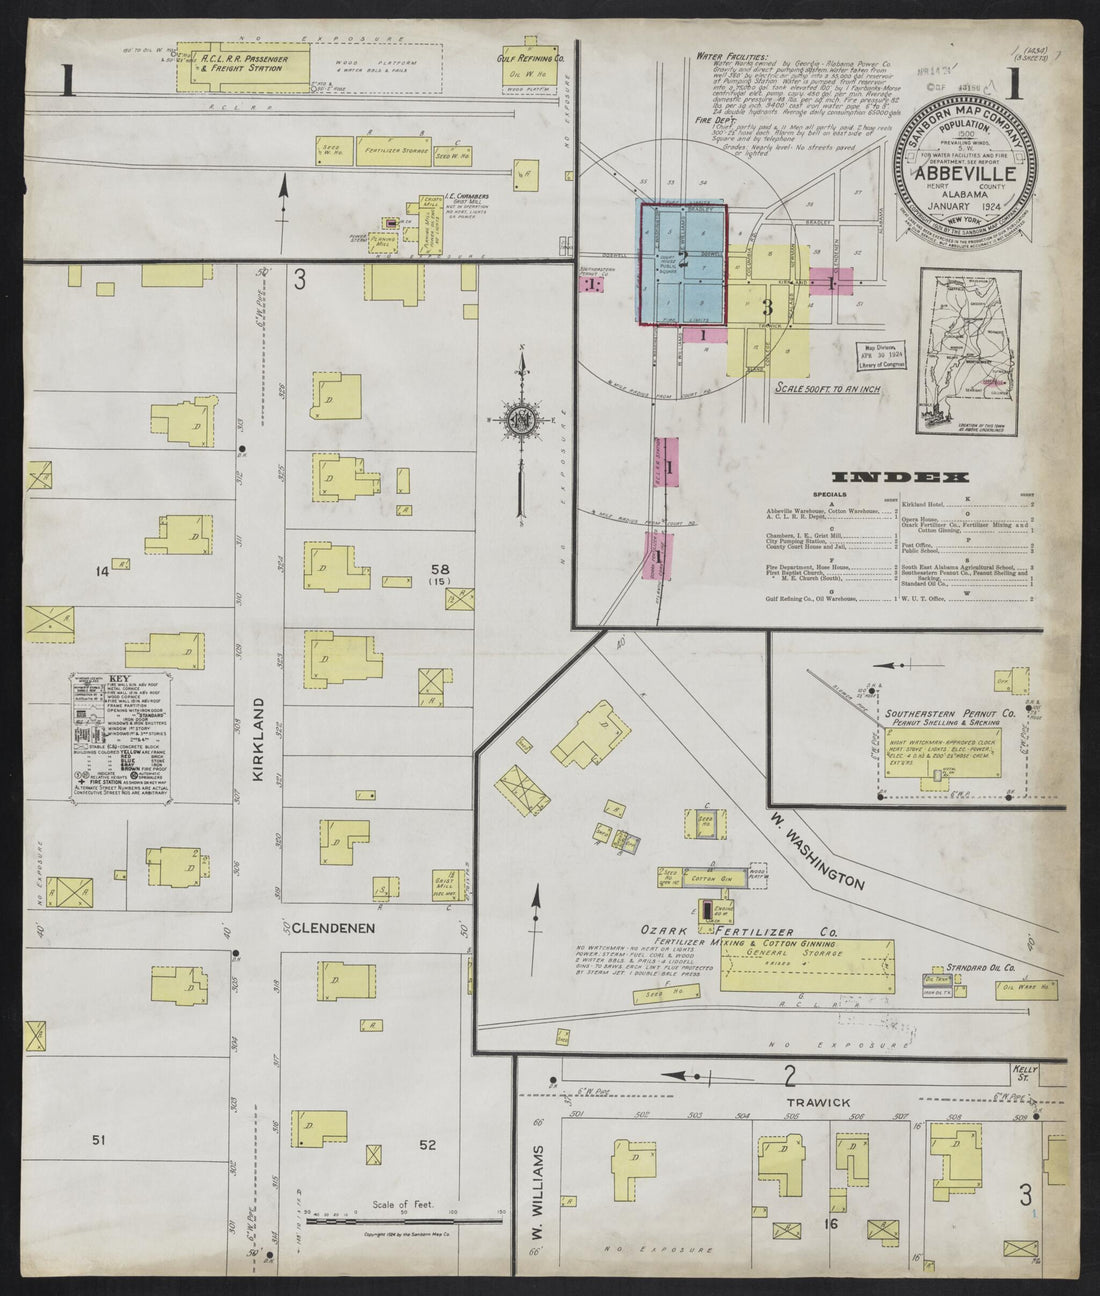 This old map of Abbeville, Henry County, Alabama was created by Sanborn Map Company in 1924